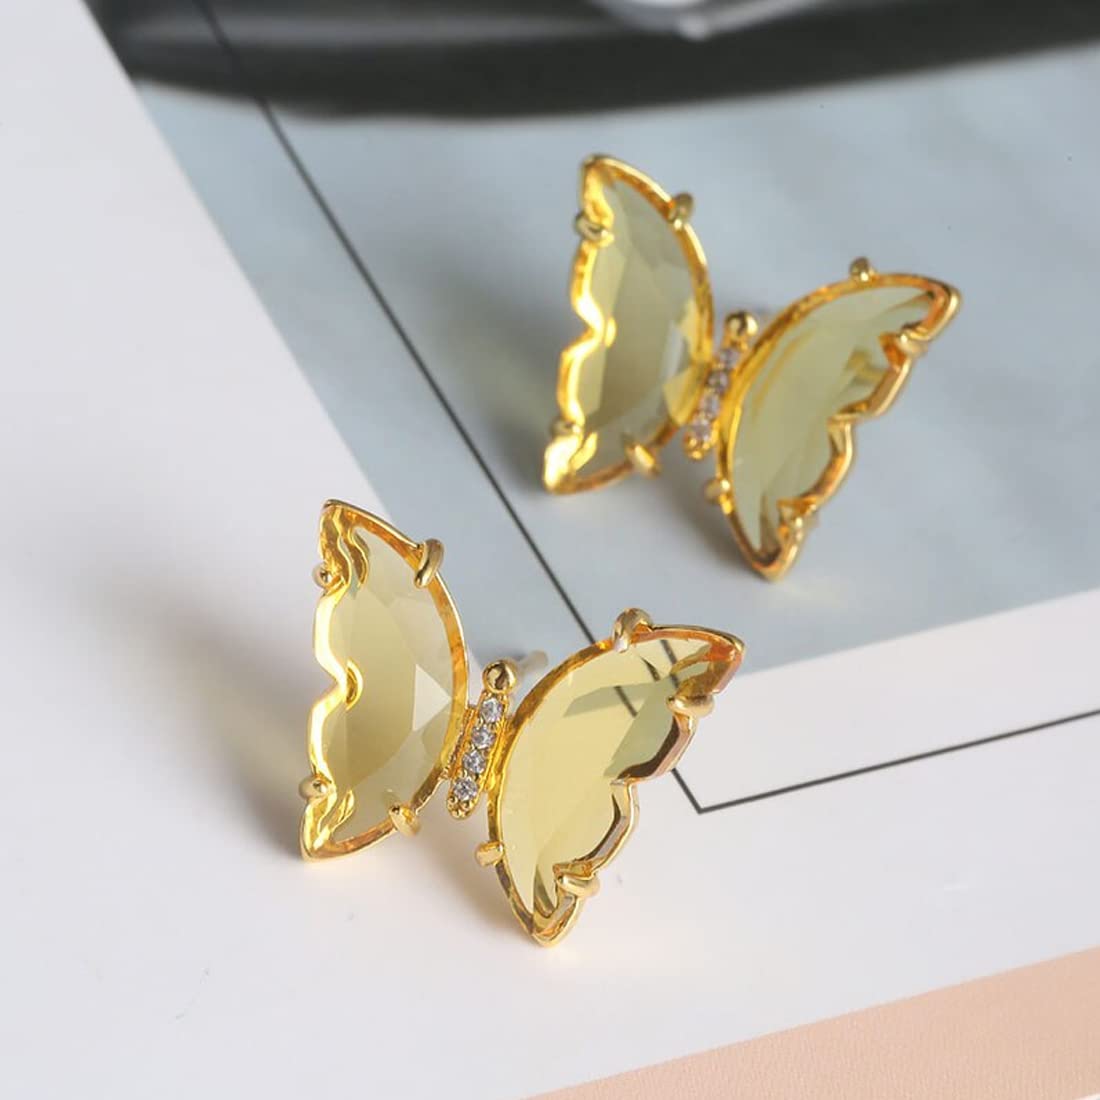 Yellow Chimes Elegant Latest Fashion Gold Plated Yellow Studded Crystal Butterfly Shaped Stud Earrings for Women and Girls